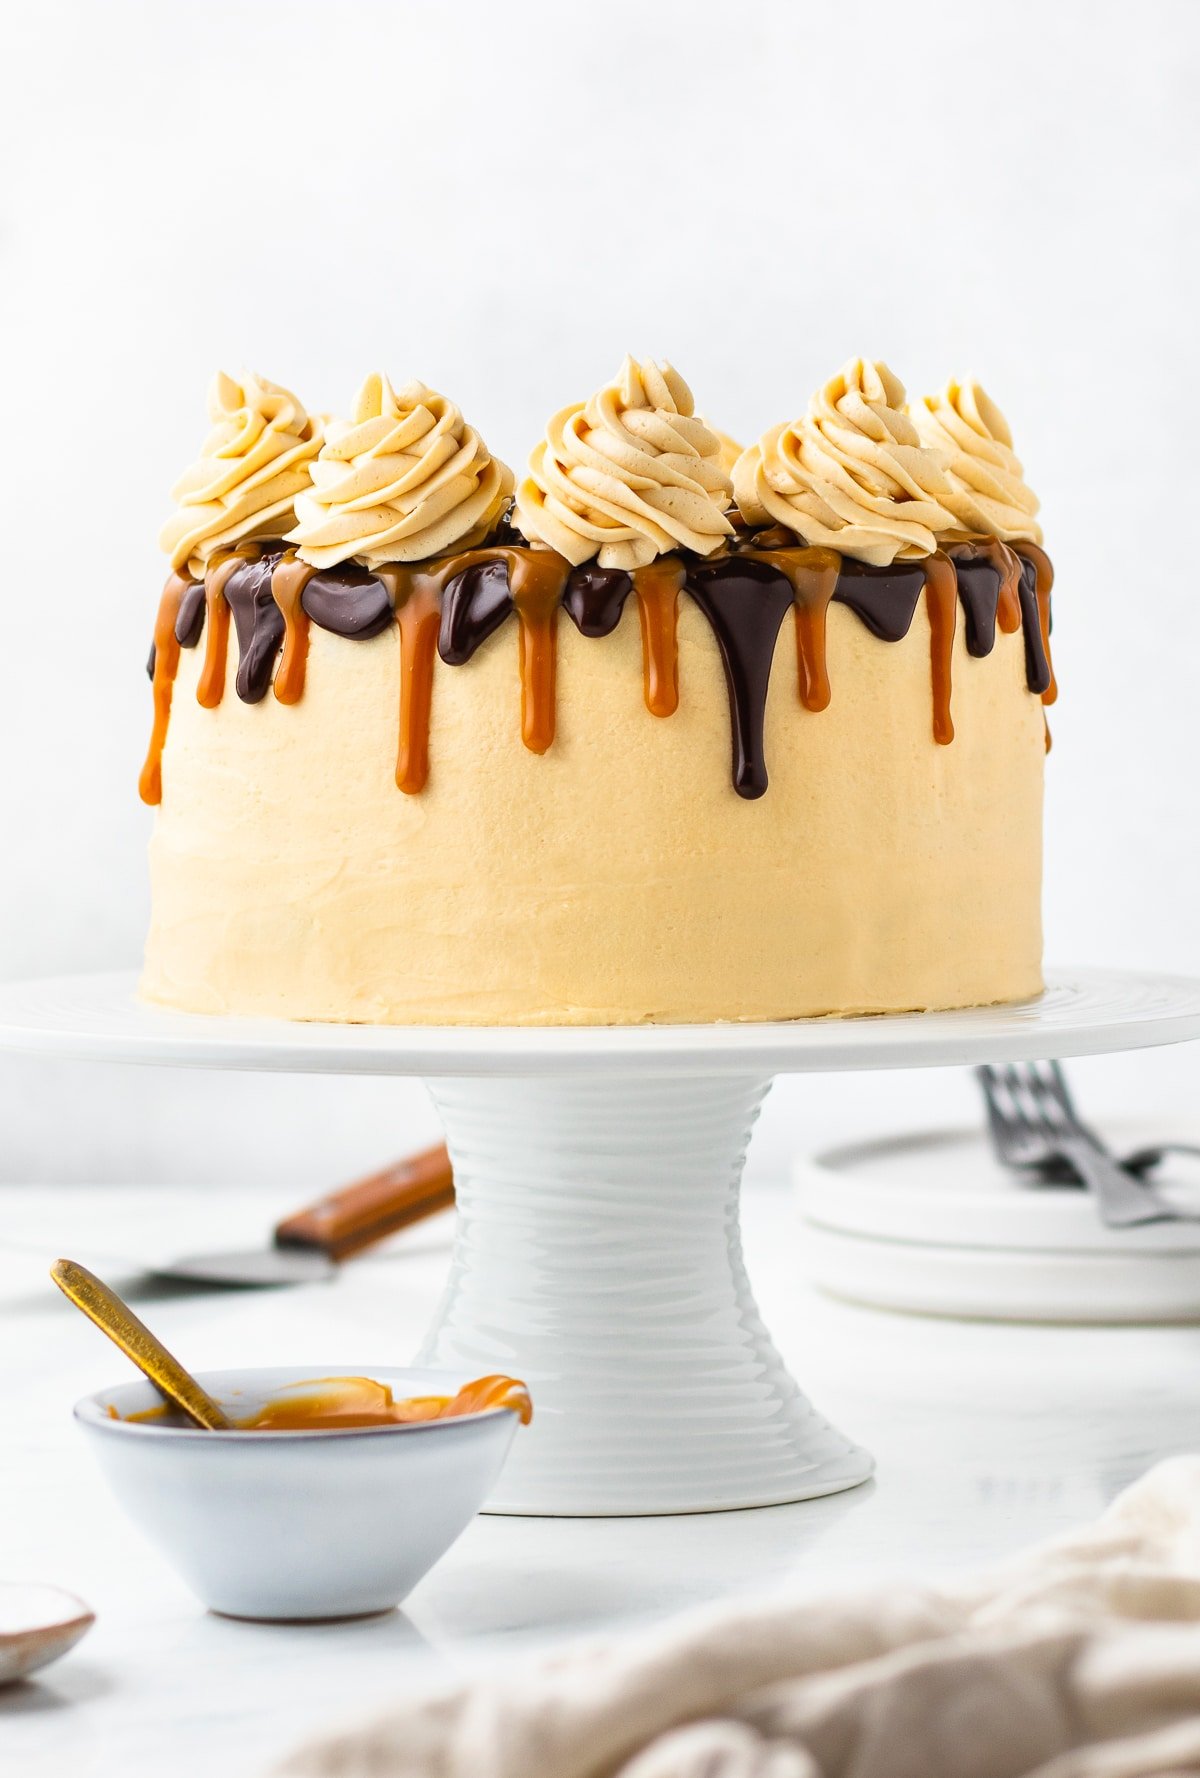 straight on image of chocolate caramel cake on a cake stand